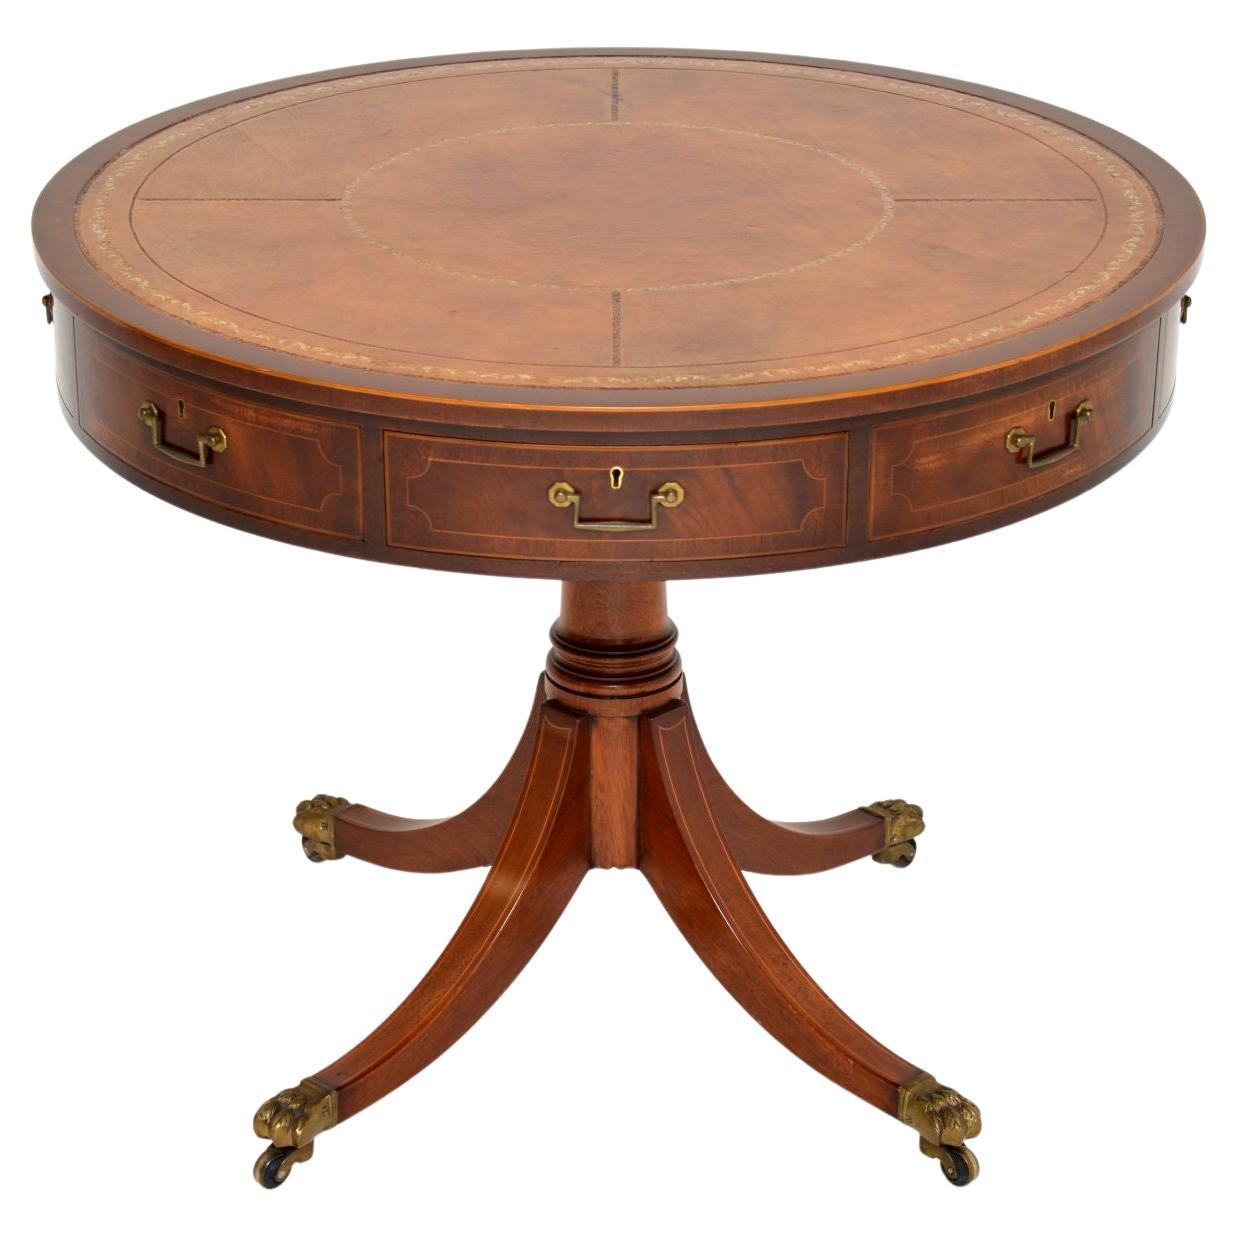 Antique Regency Style Leather Top Drum Table